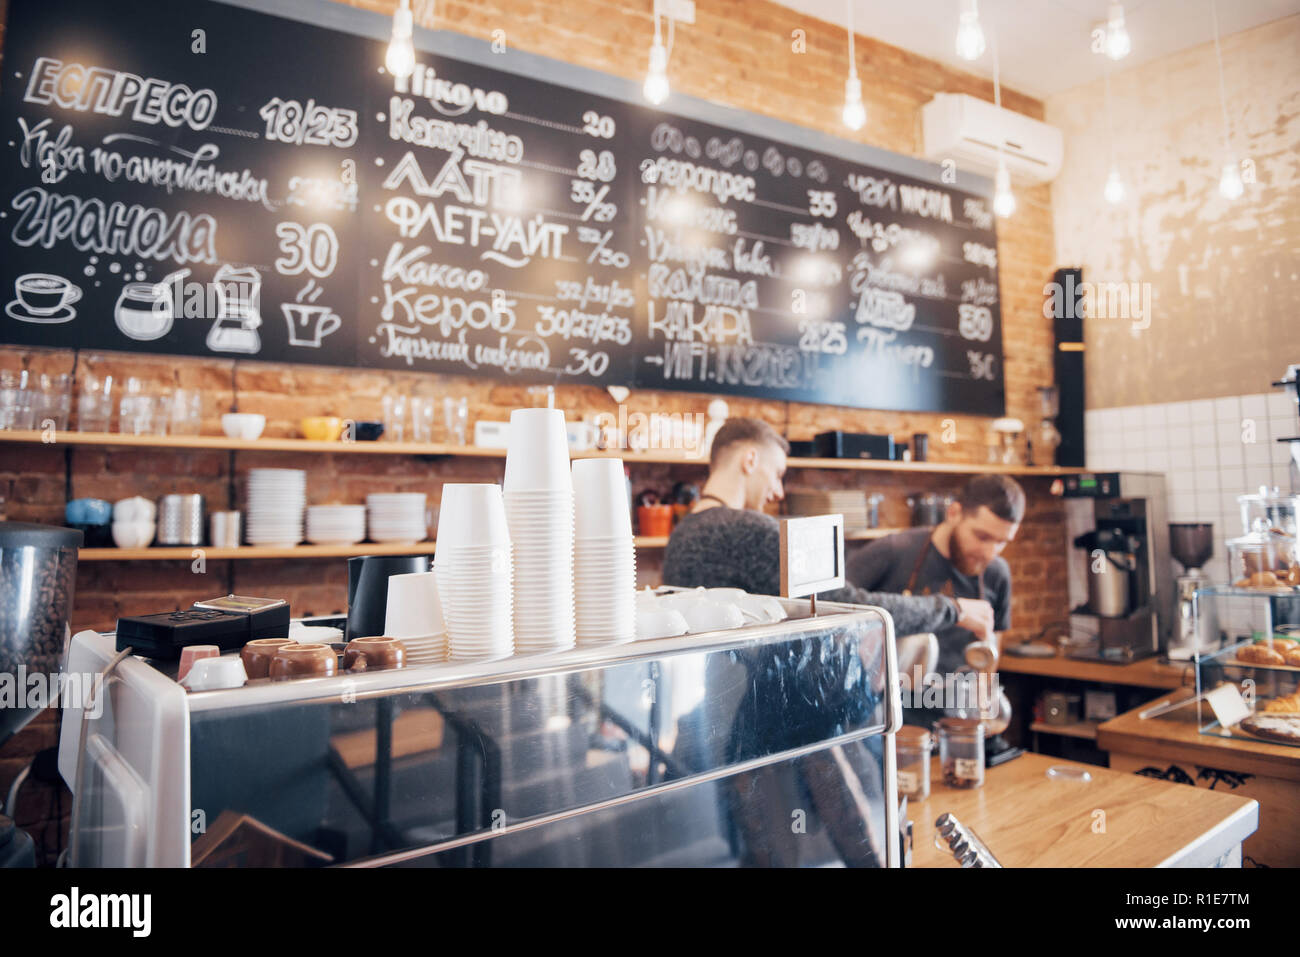 Hipster looking coffee shop ready to open for the day with a clean and tidy counter and well-maintained shiny coffee machine on the the wooden surface Stock Photo